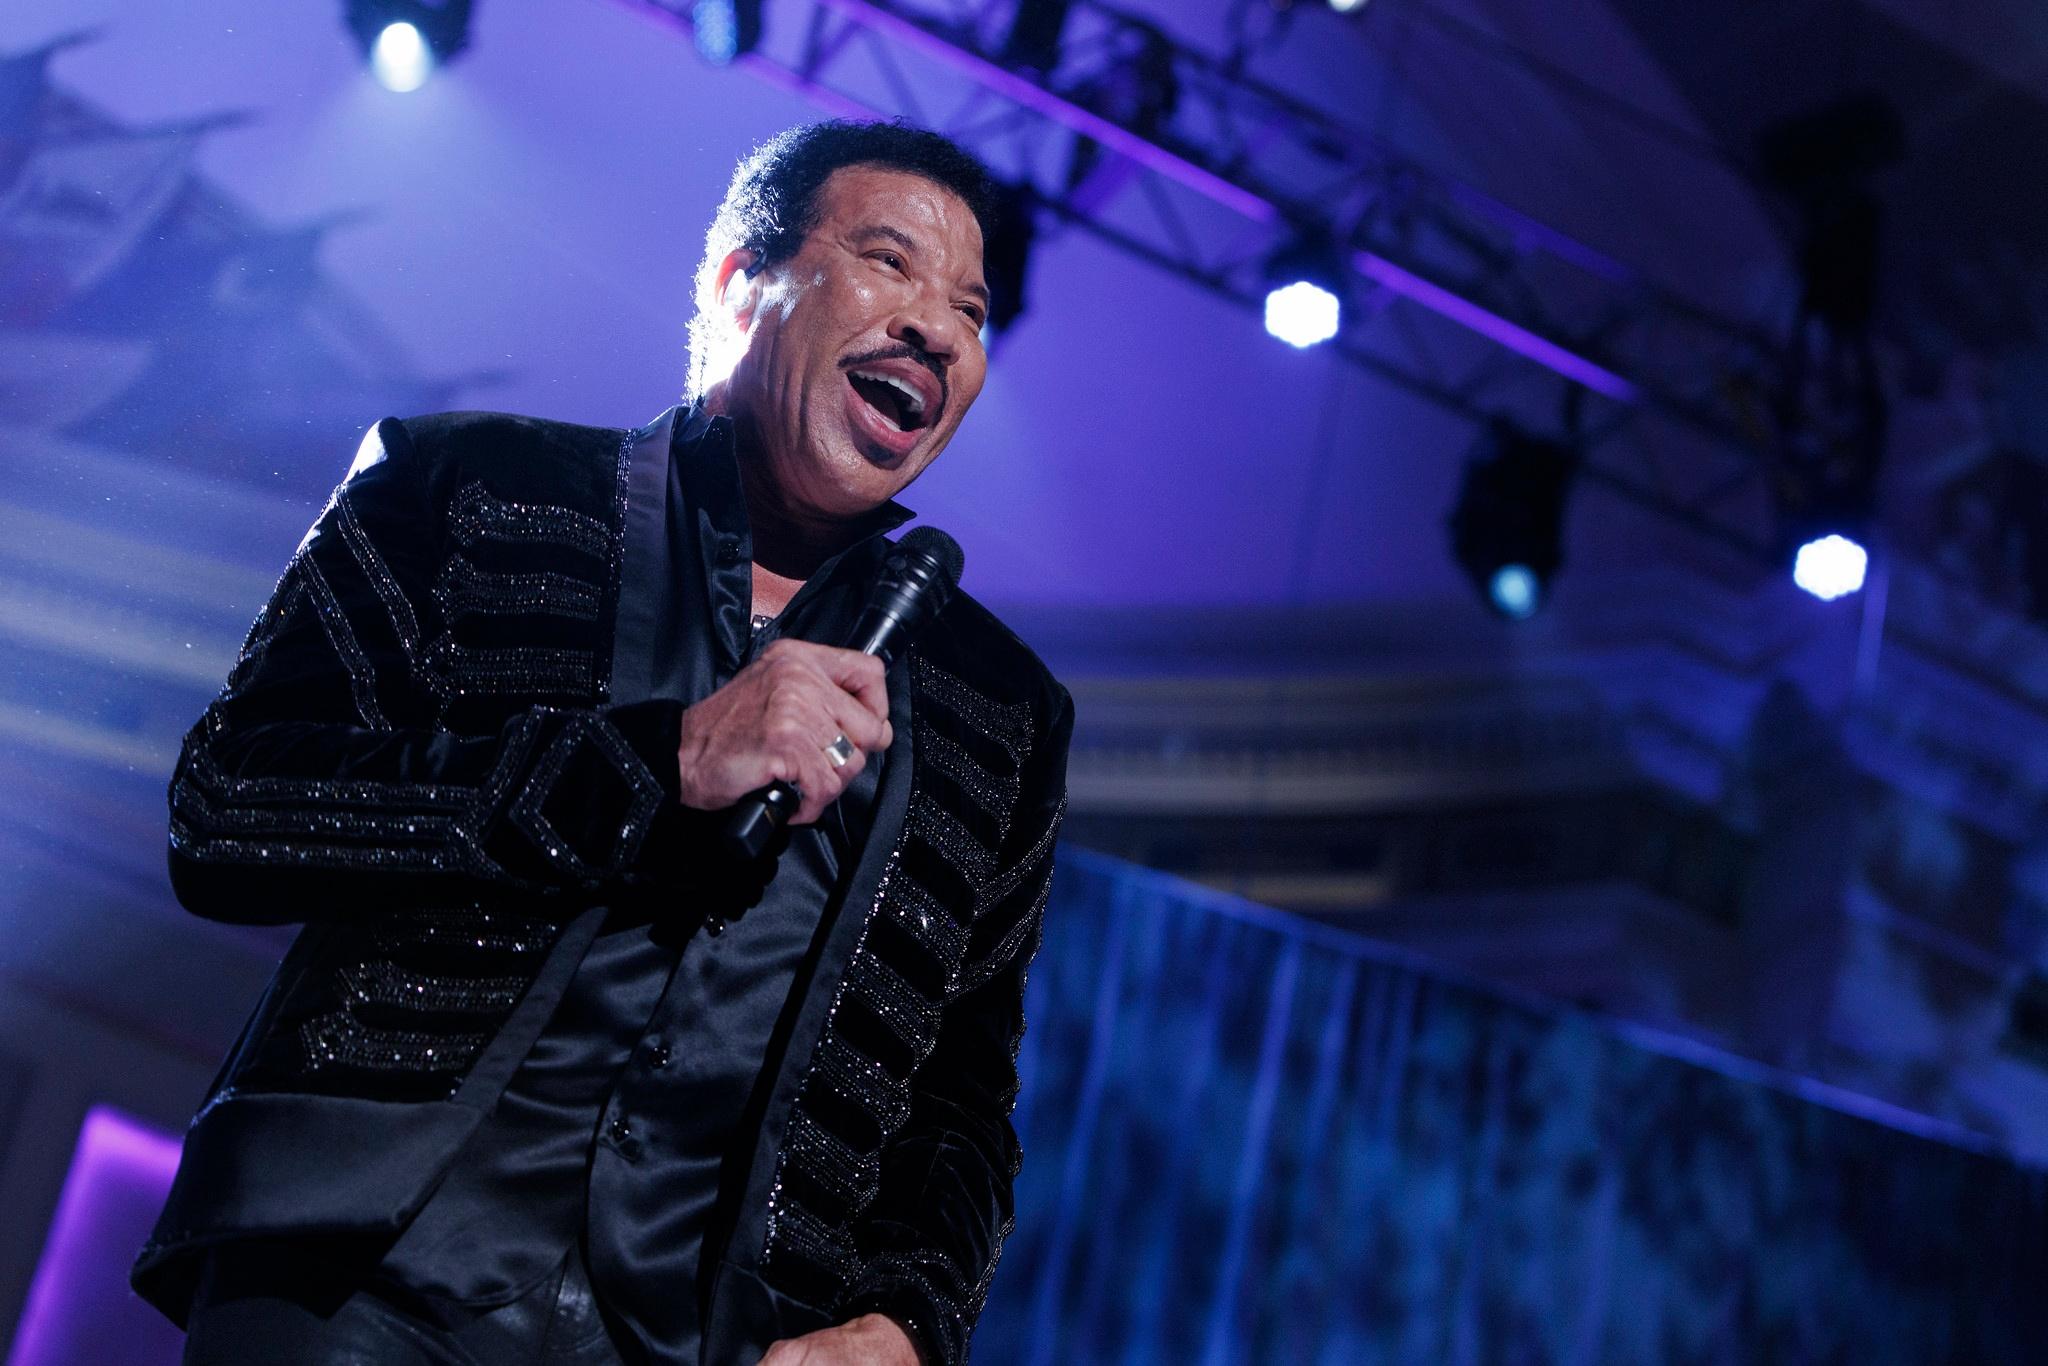 Library of Congress Gershwin Prize for Popular Song honoree Lionel Richie 